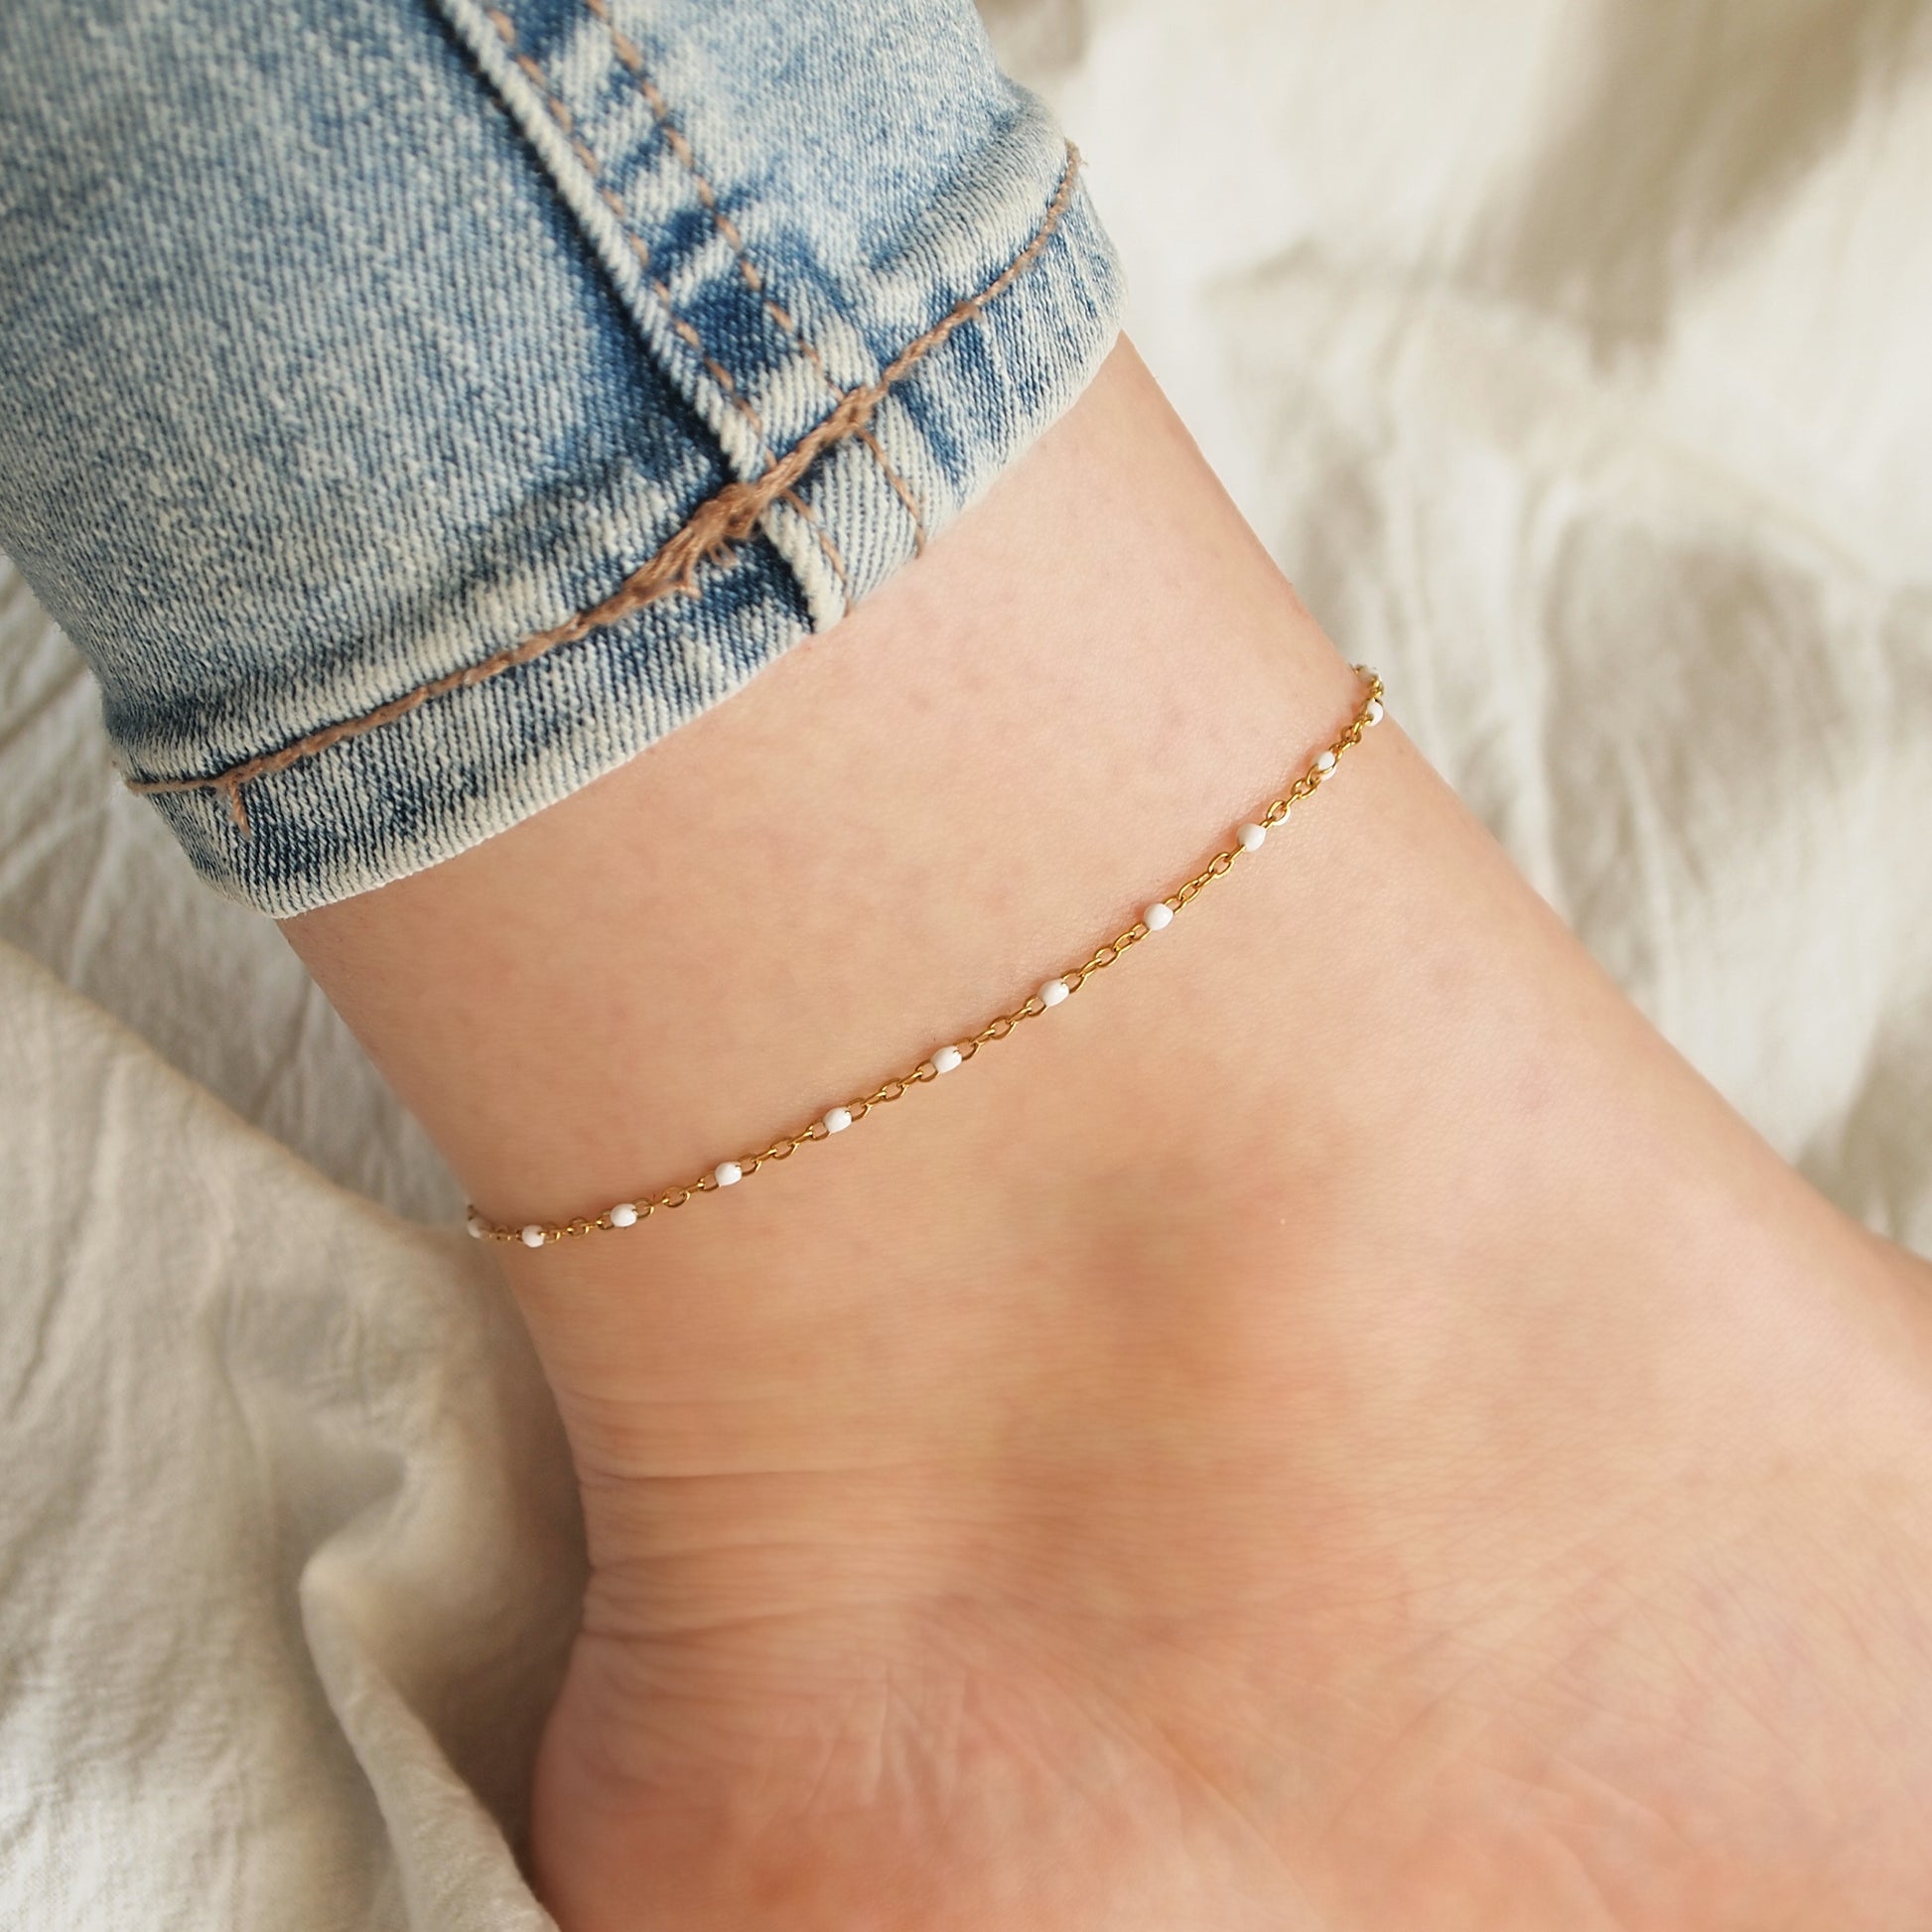 stainless steel woman anklet with white beads